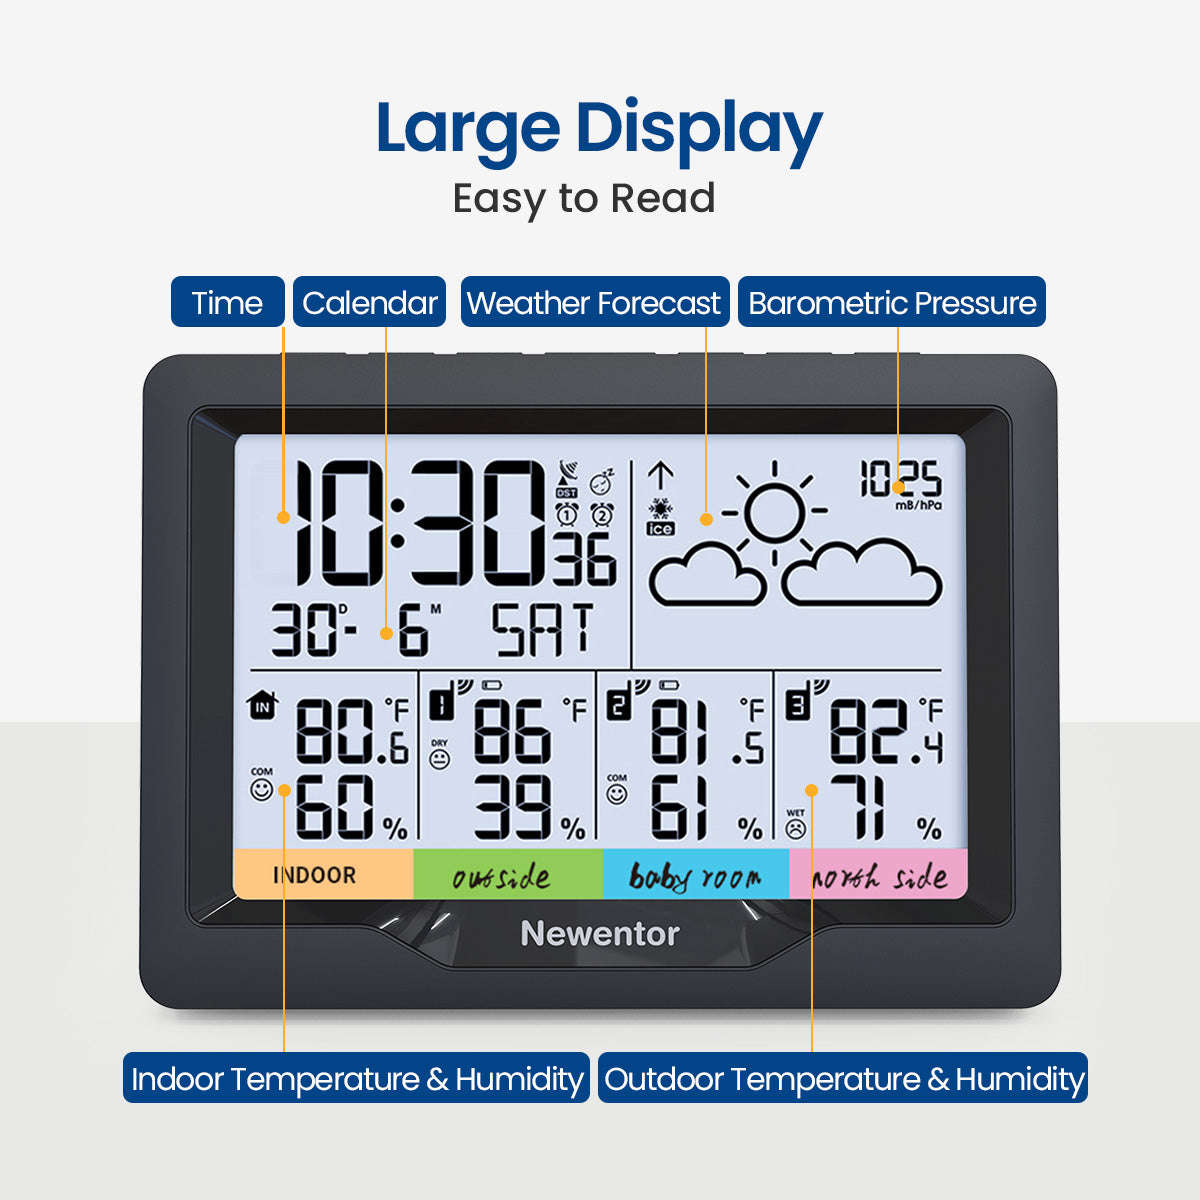 Digital Weather Station - Temperature & Humidity with Forecast